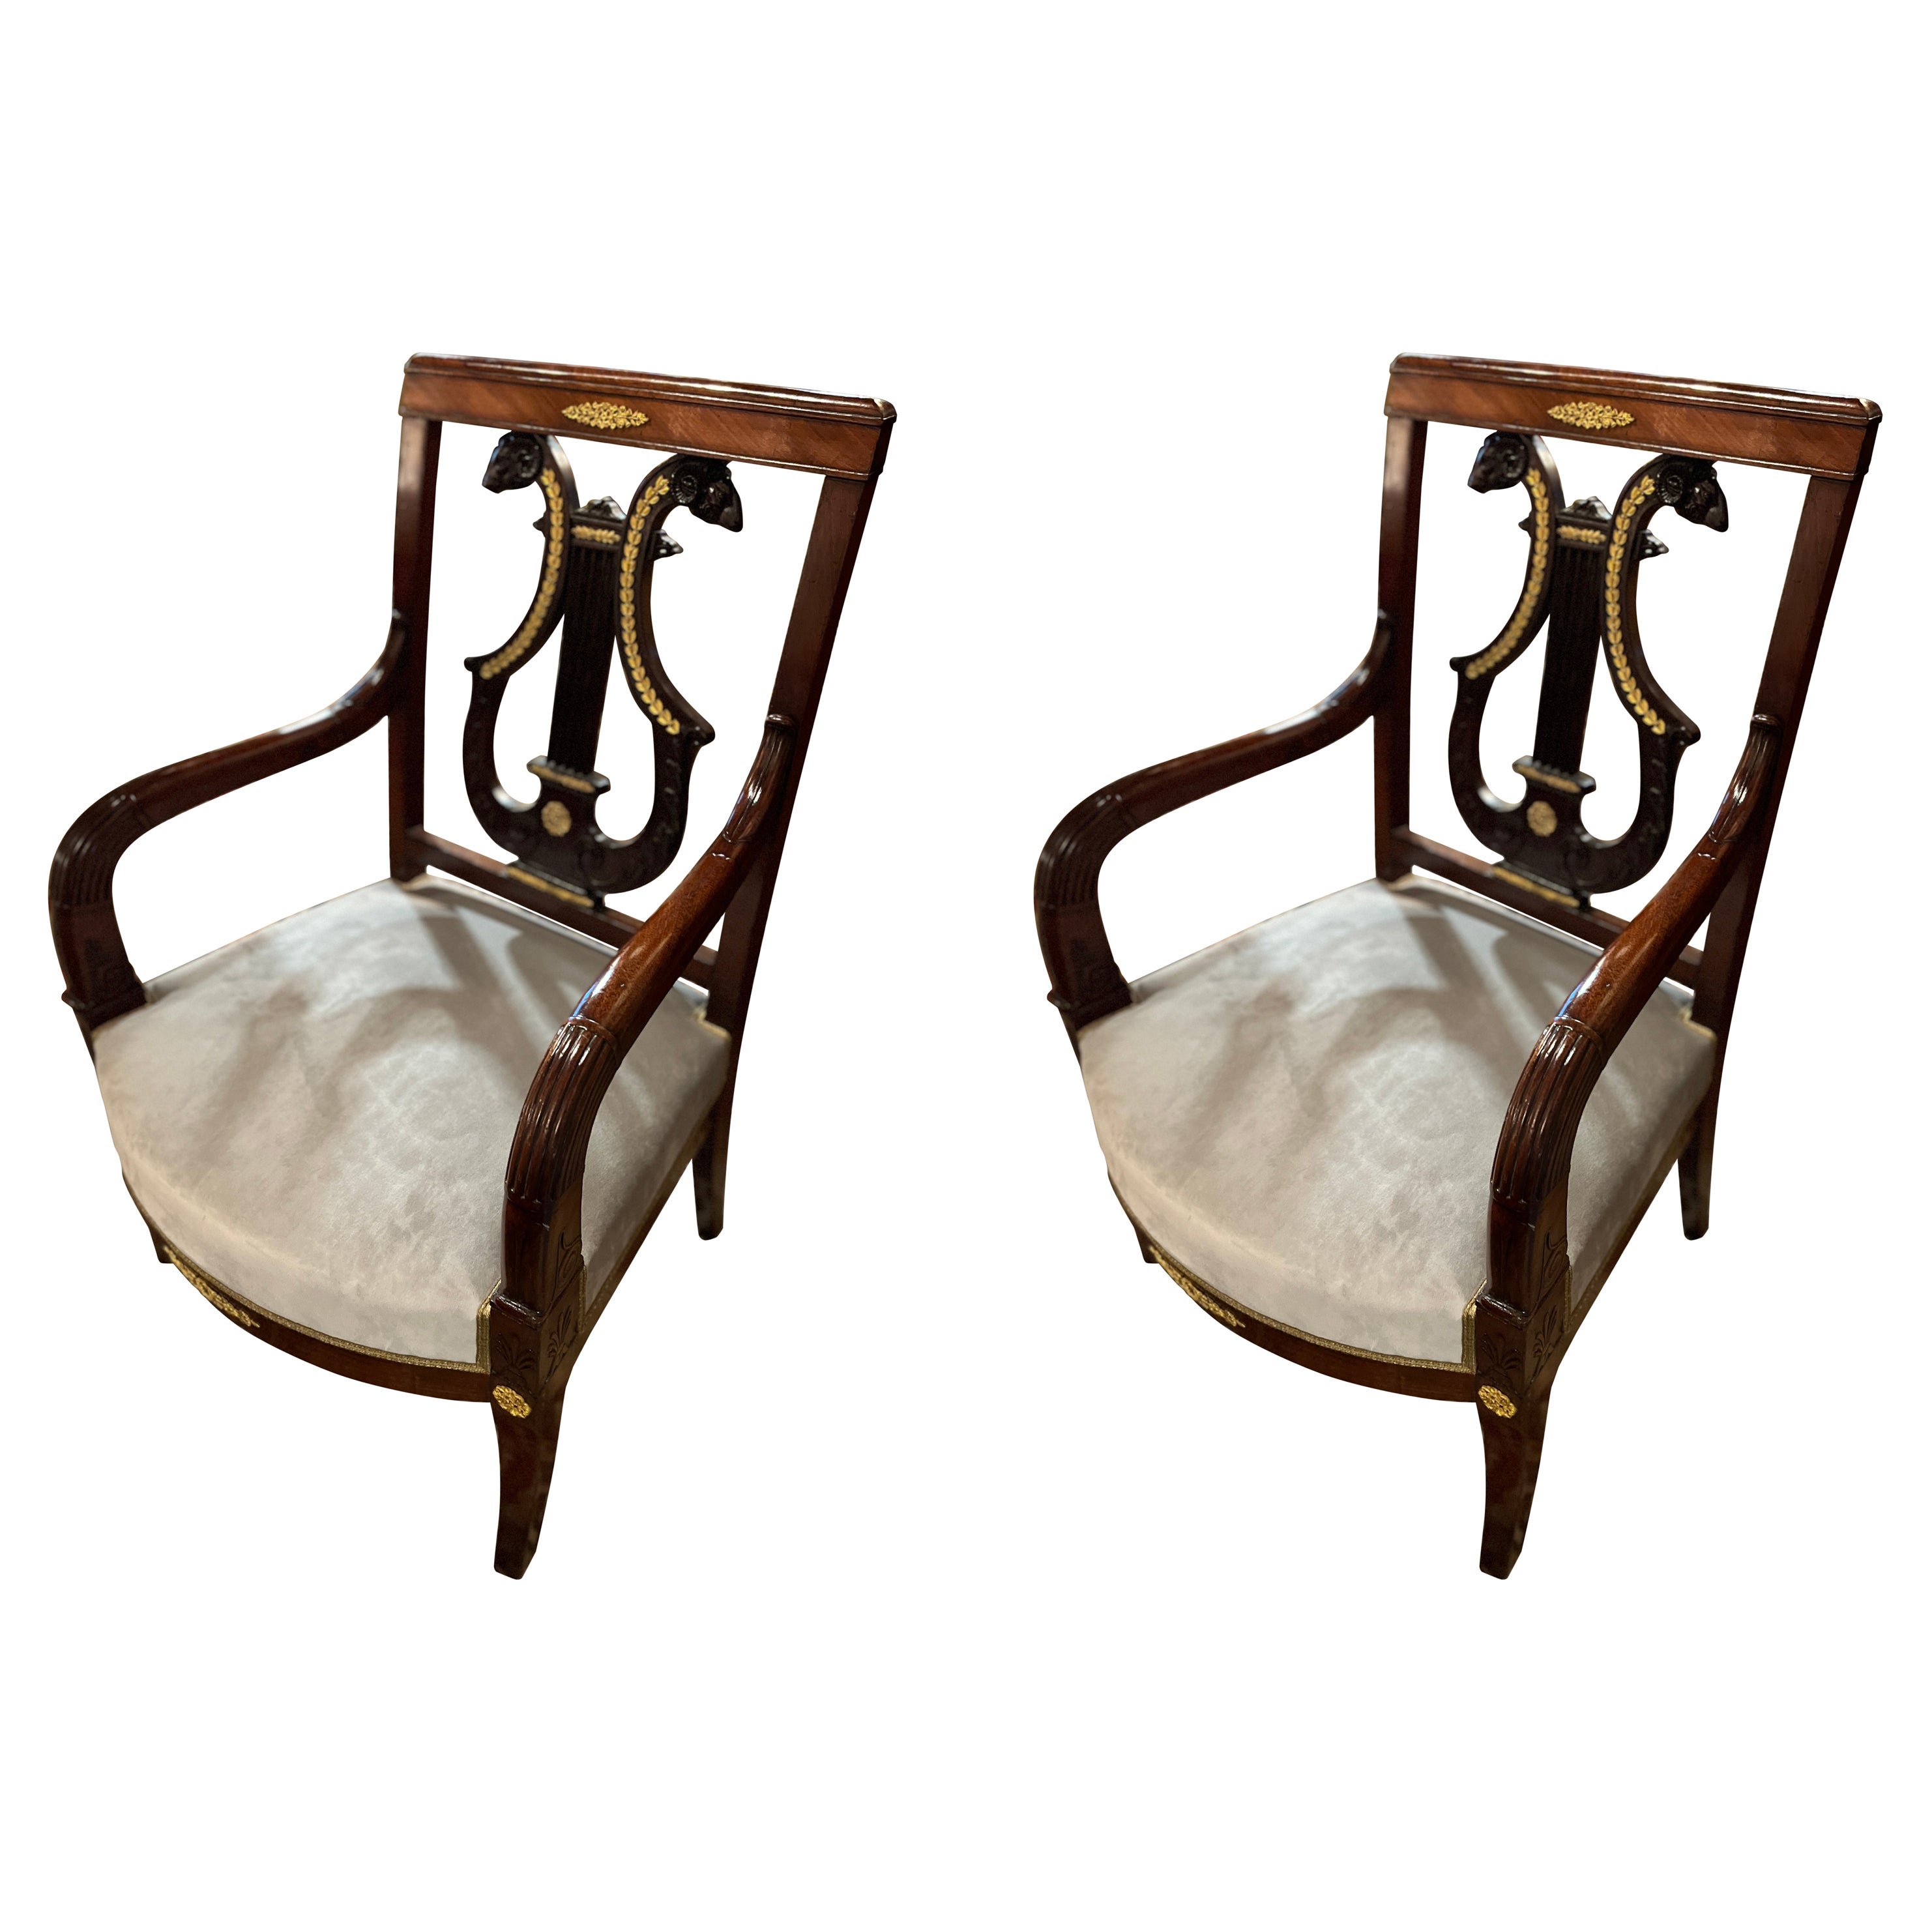 Pair of 19th Century Mahogany French Regence Library Chairs For Sale